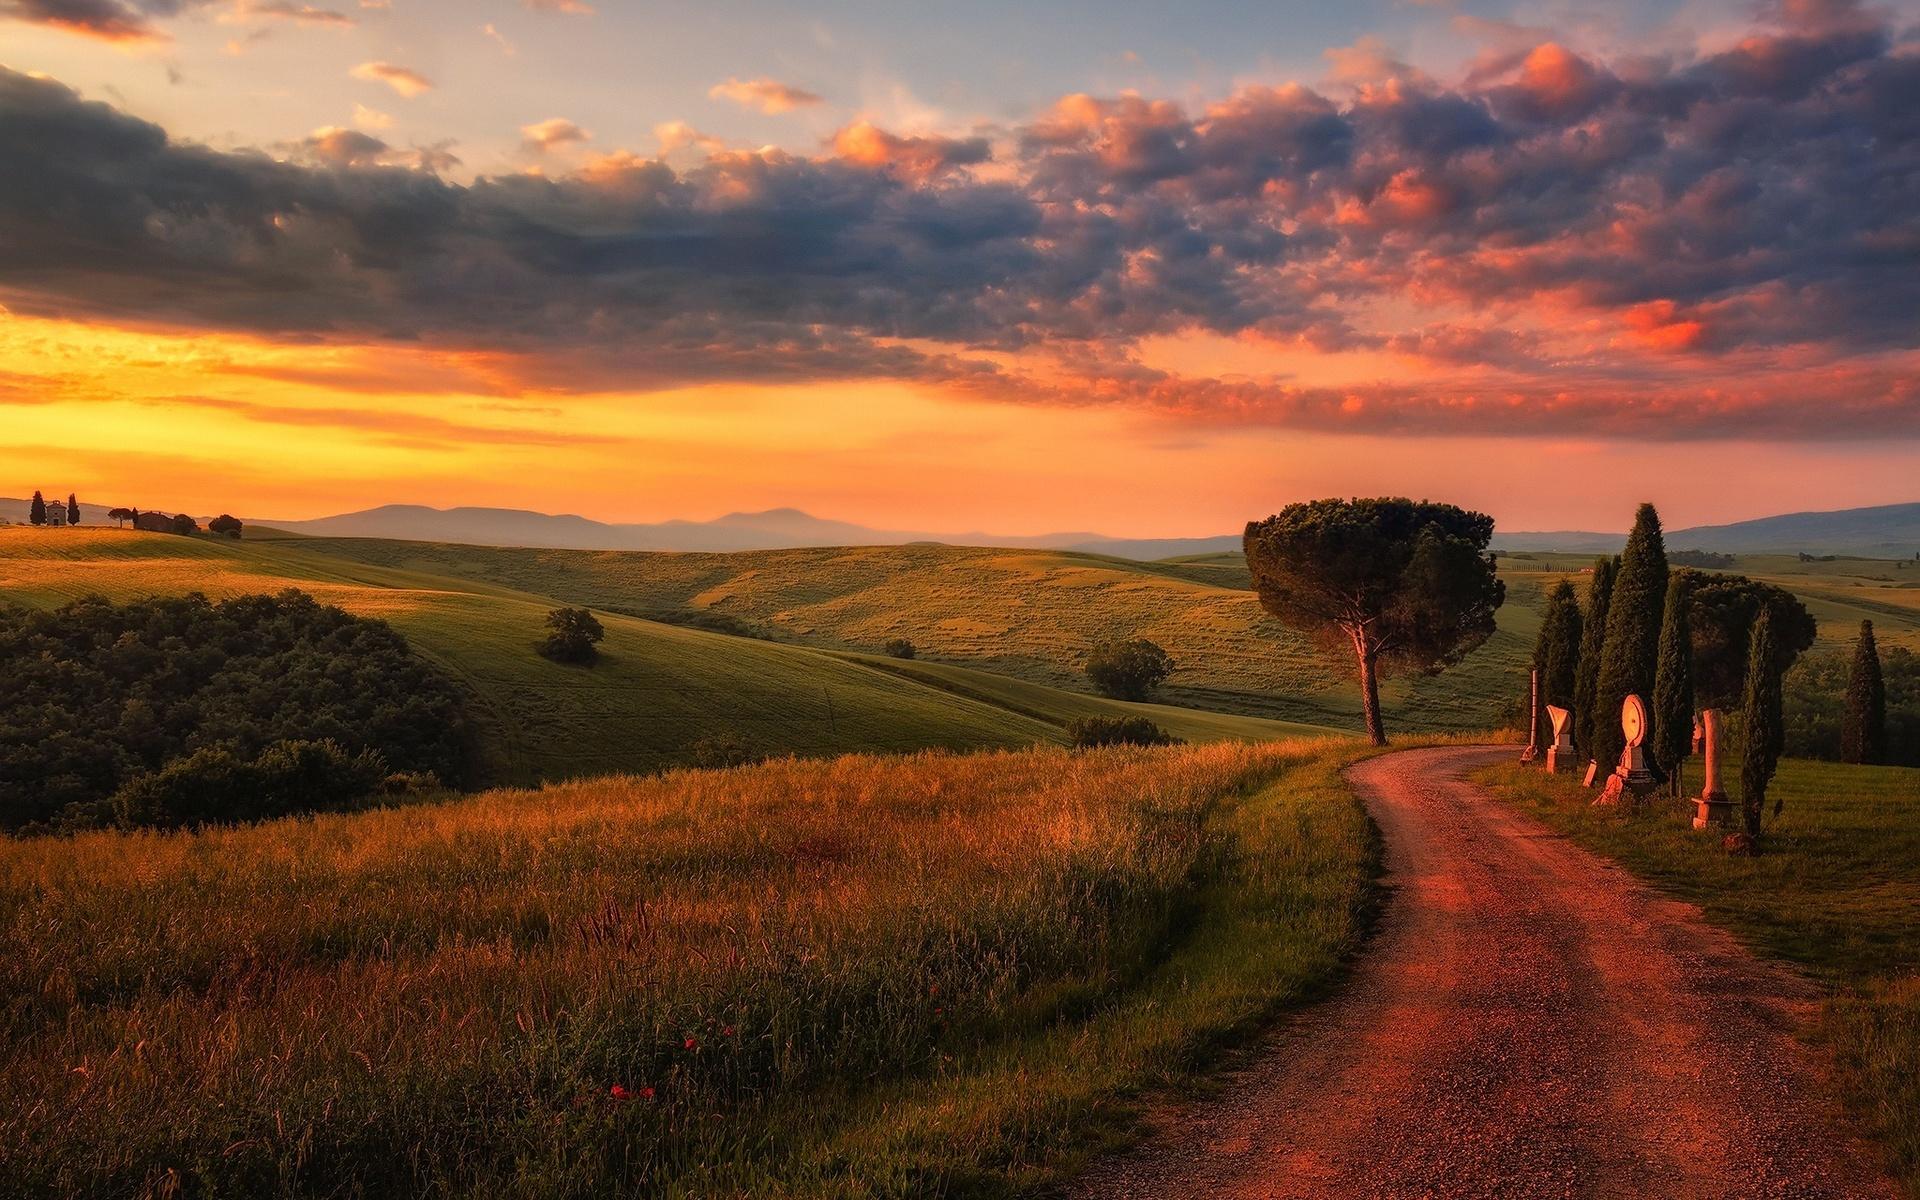 Download wallpapers Tuscany, sunset, road, Italy, Europe for.